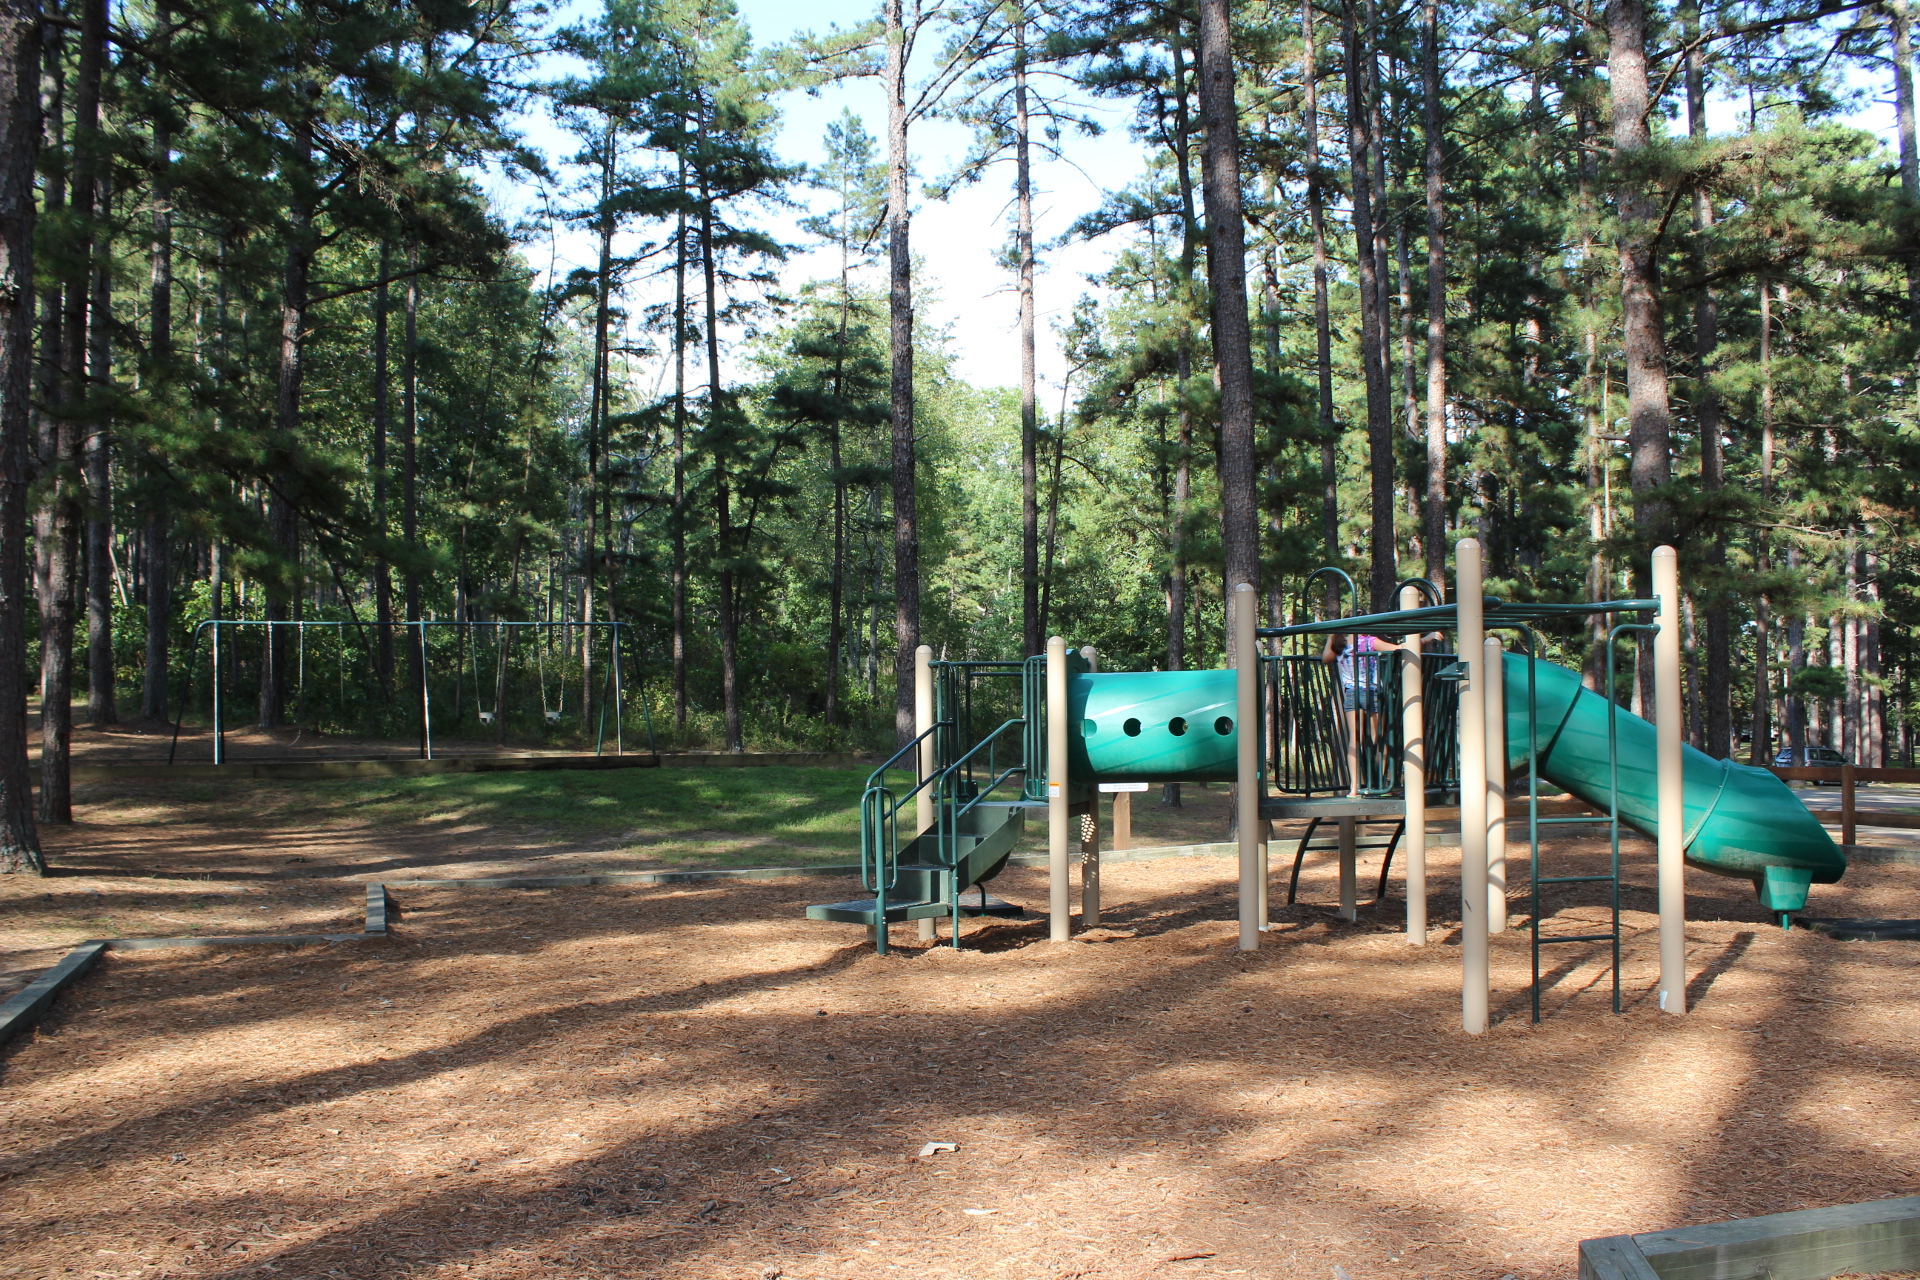 playground equipment with slide in a shaded setting